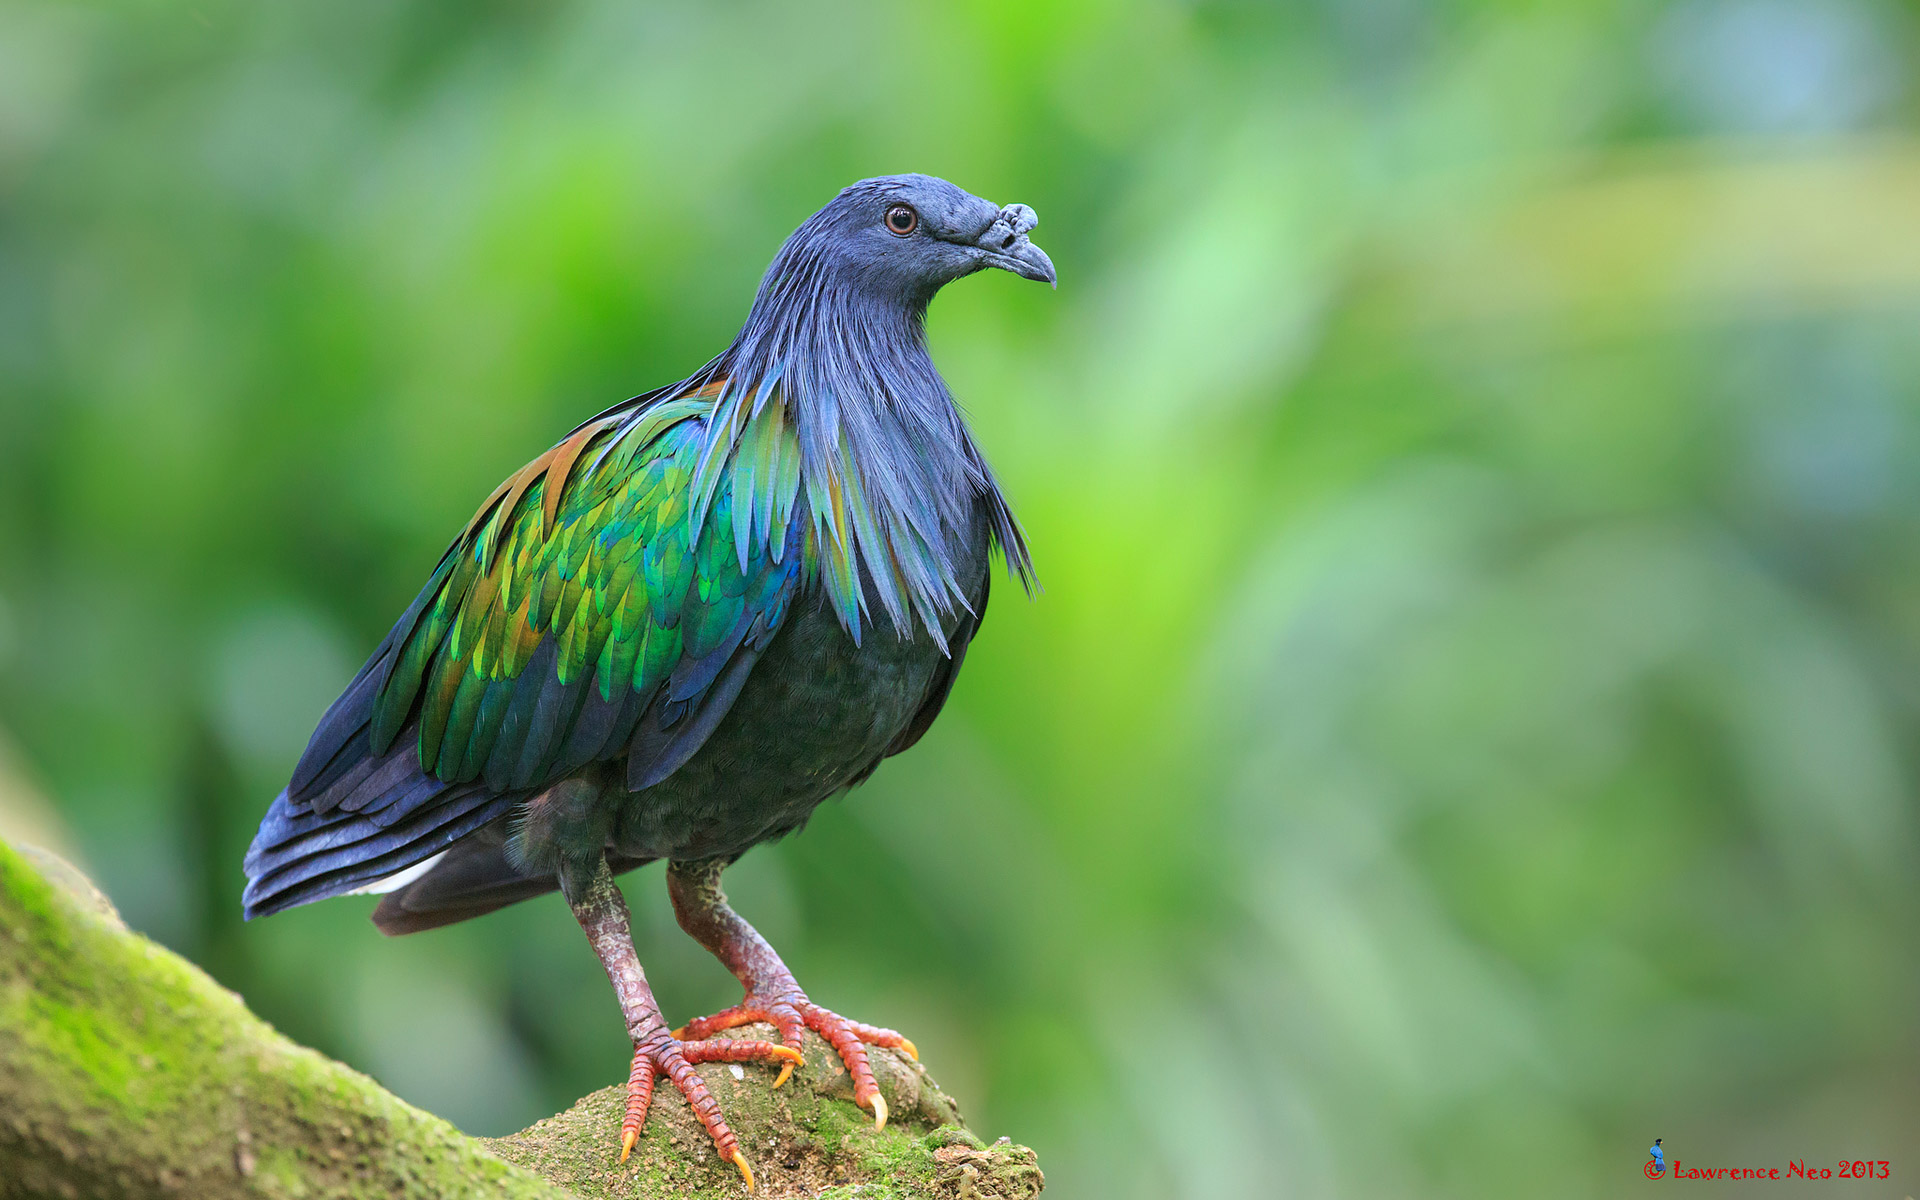 Nicobar Pigeon HD Wallpaper by lawrence neo